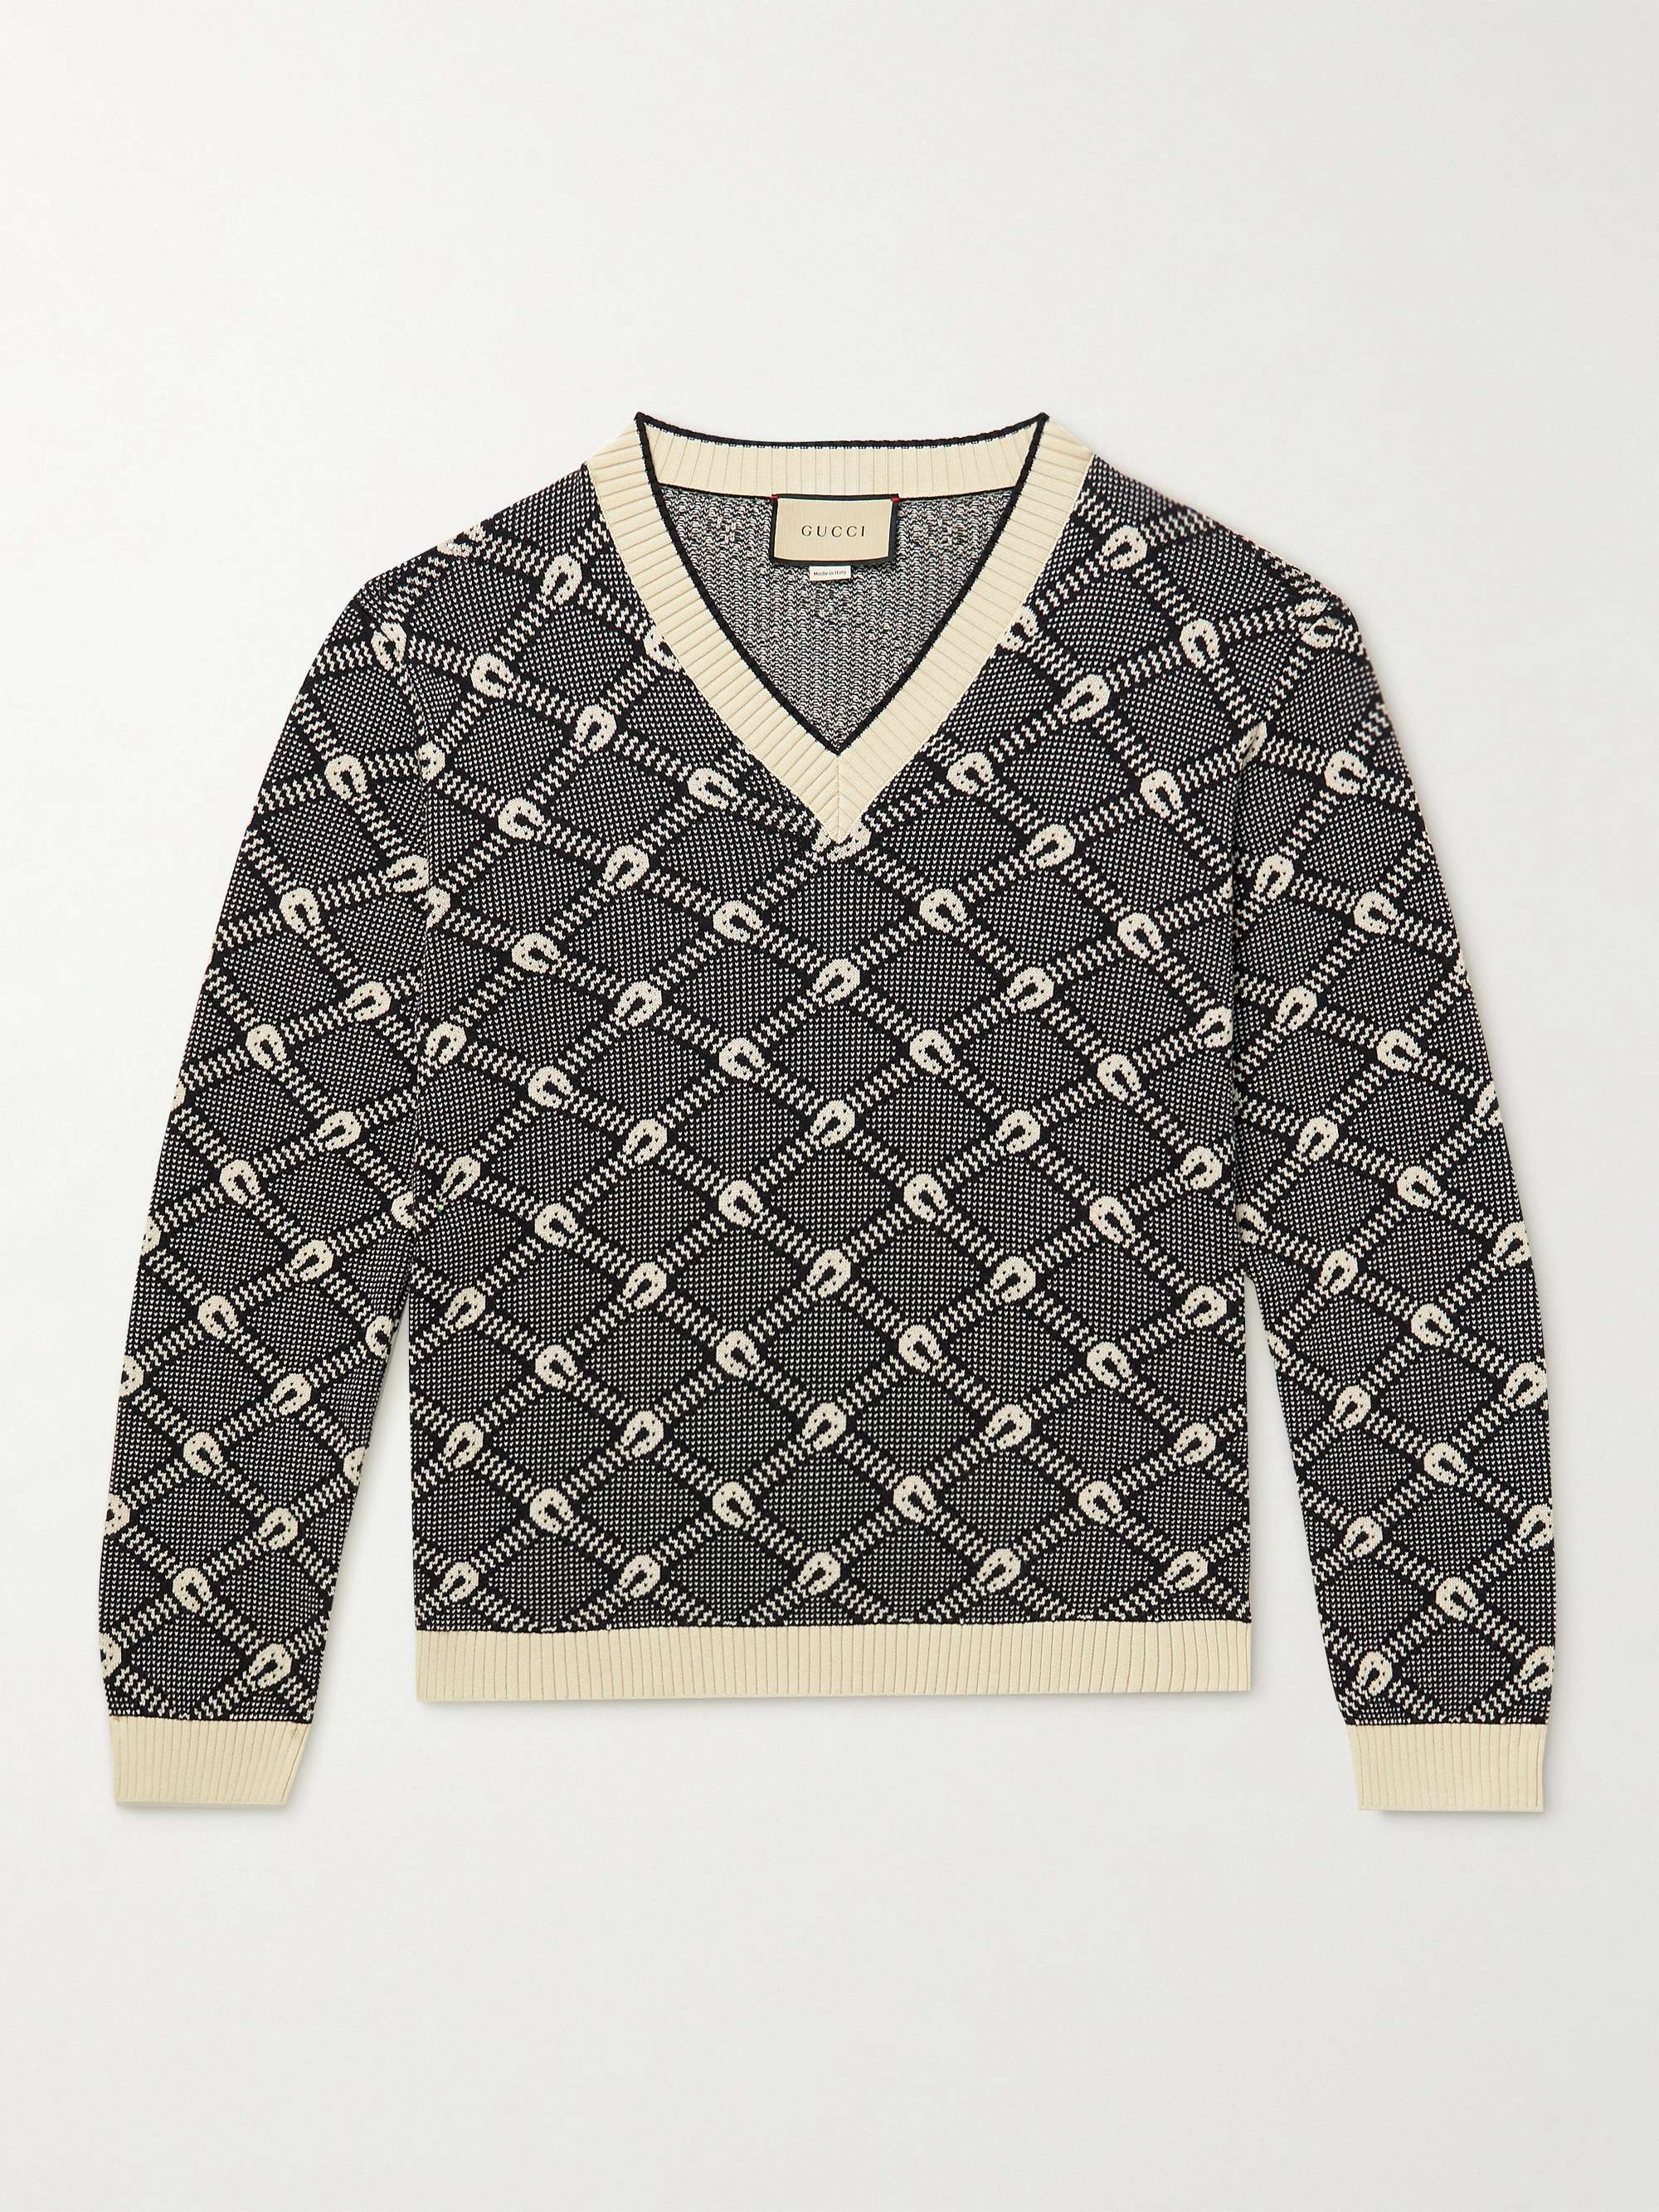 GUCCI Slim-Fit Jacquard-Knit Cotton and Cashmere-Blend Sweater